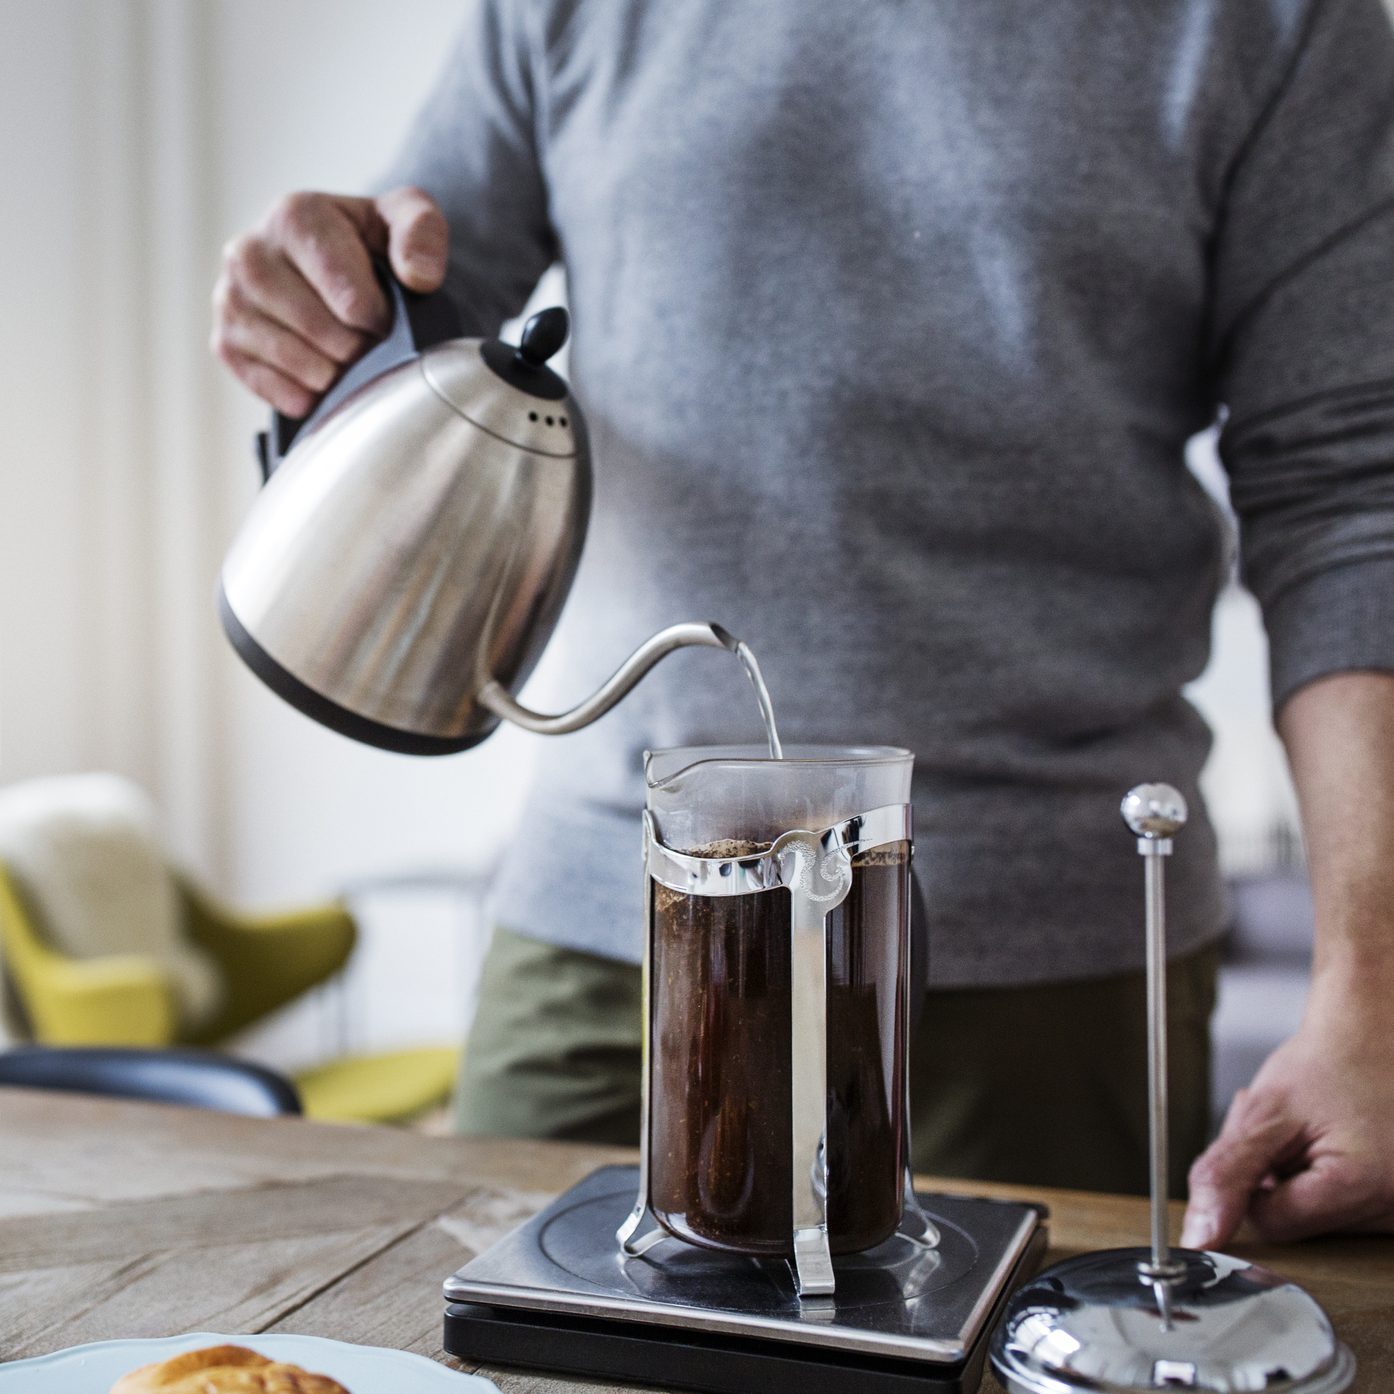 Midsection of man pouring water in French press while preparing coffee at home